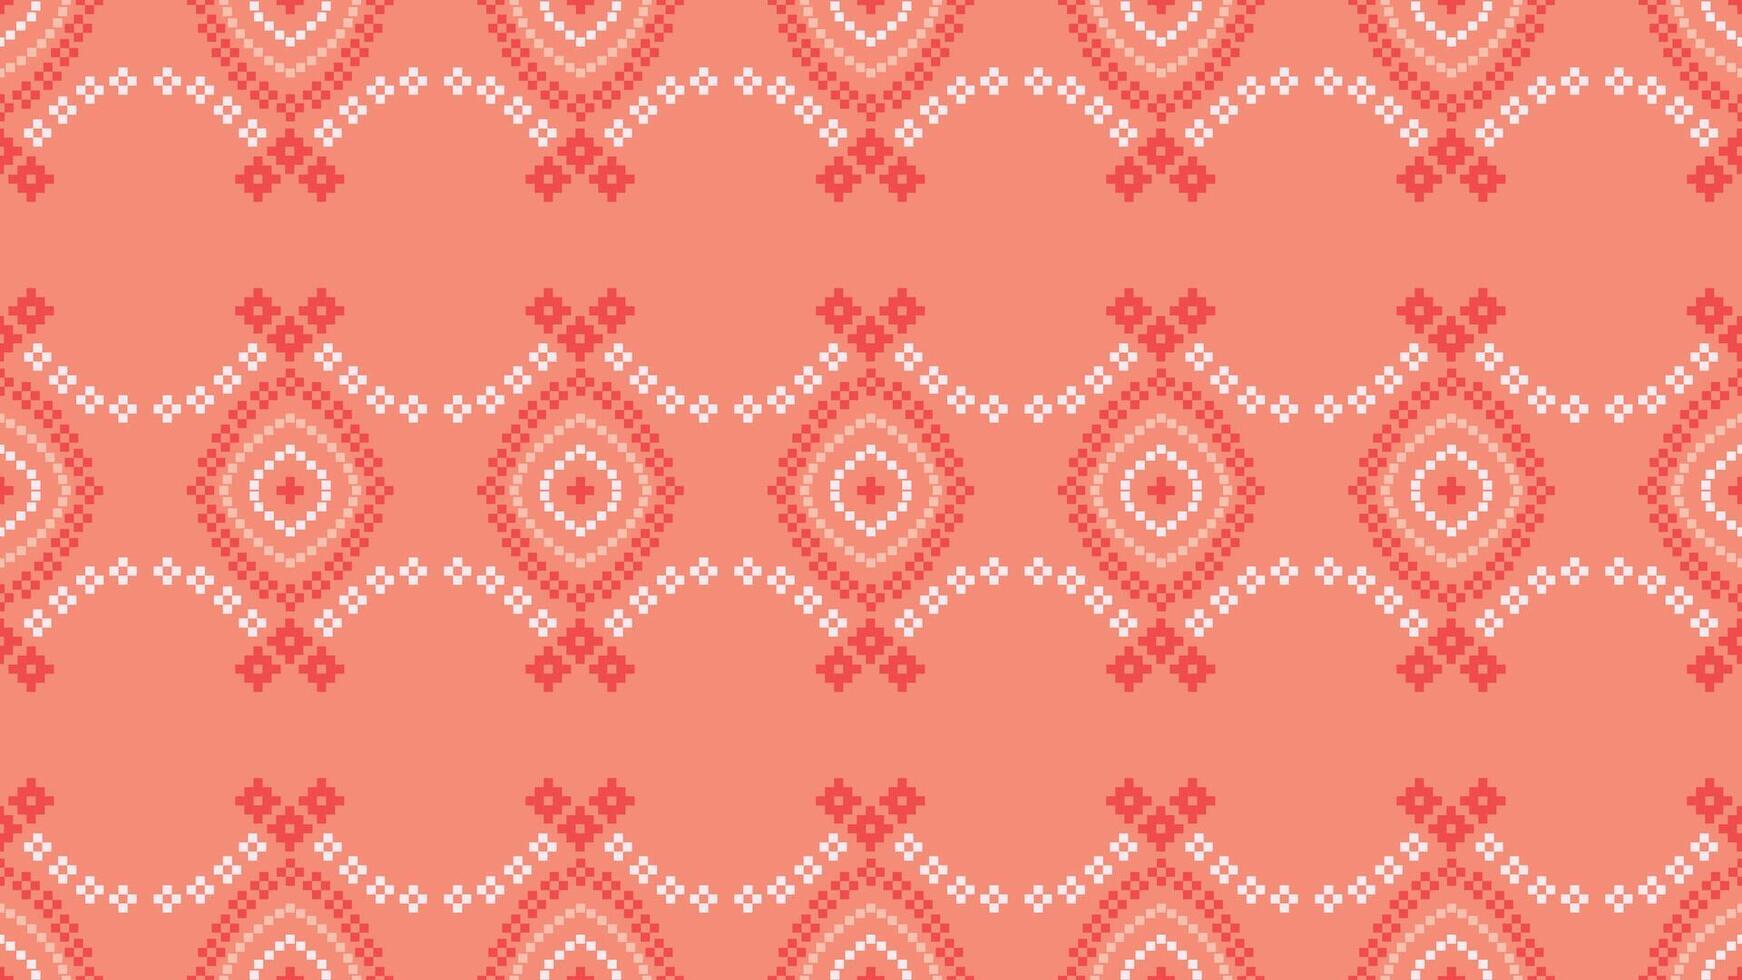 Ethnic geometric fabric pattern Cross Stitch.Ikat embroidery Ethnic oriental Pixel pattern rose pink gold background. Abstract,vector,illustration. Texture,clothing,scarf,decoration,silk wallpaper. vector